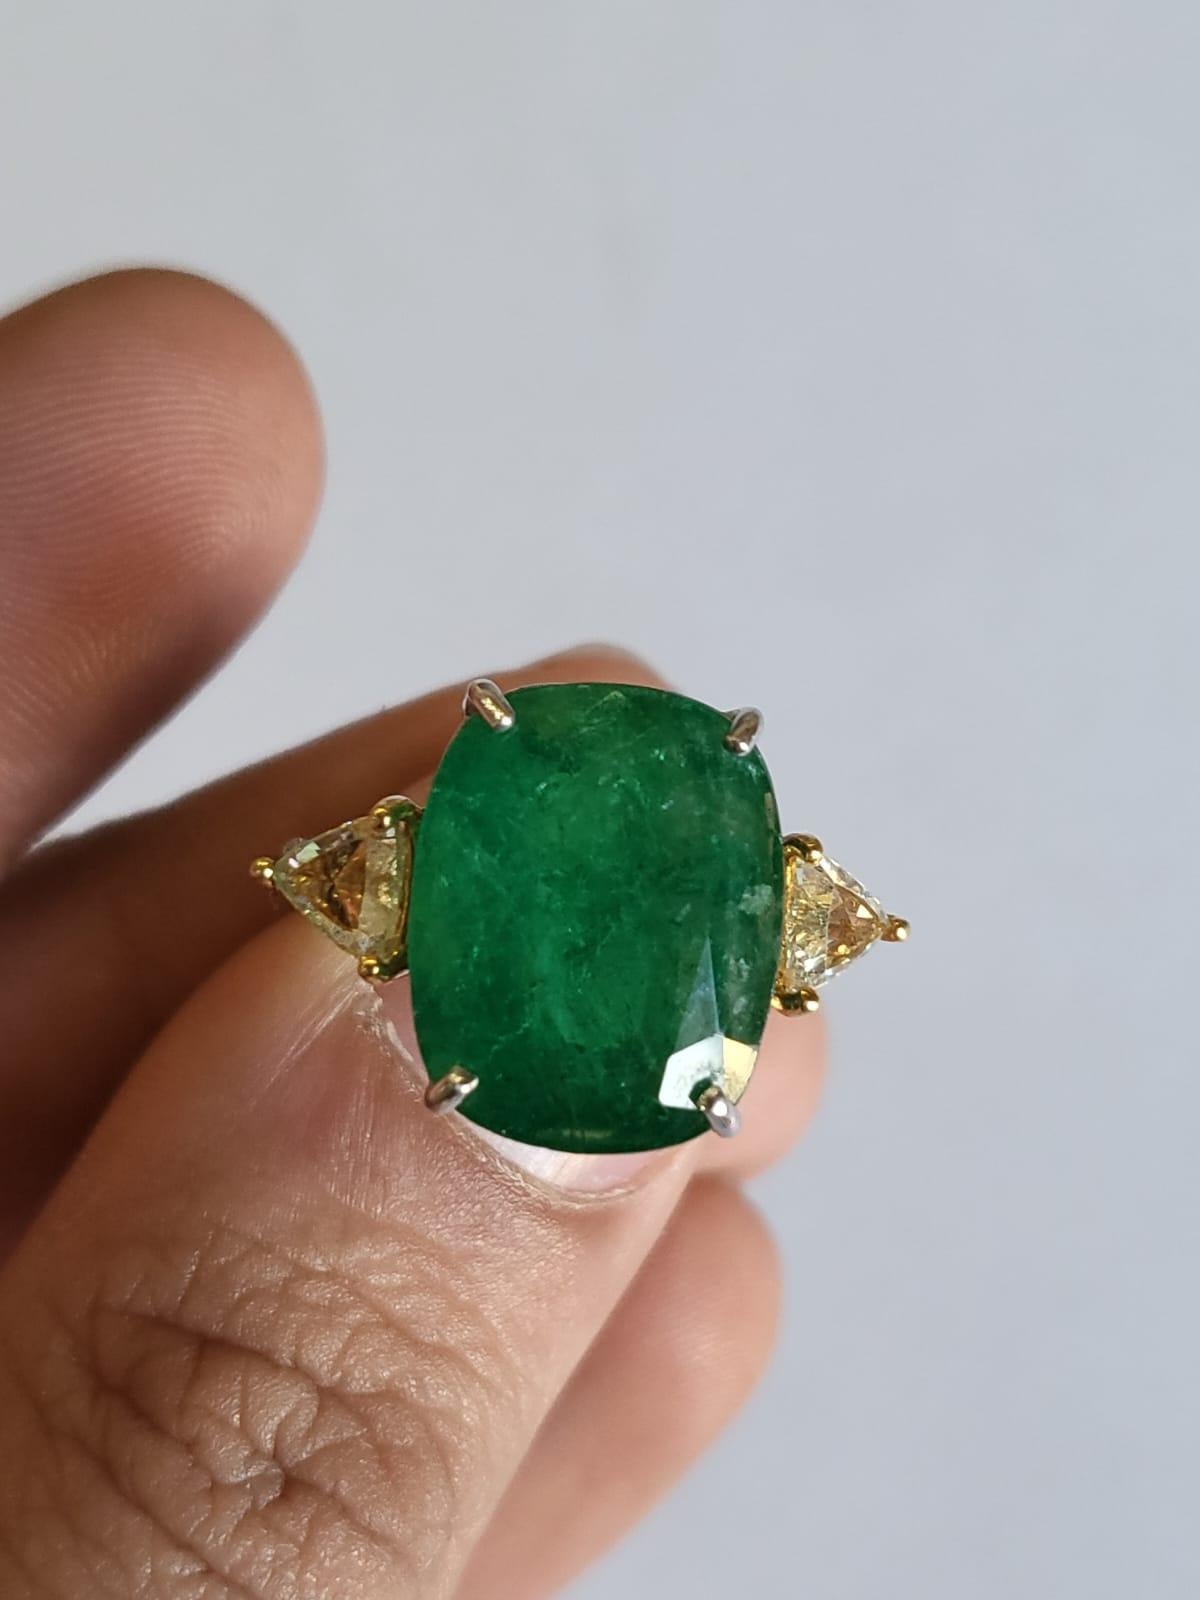 A very gorgeous and beautiful Emerald Engagement Ring set in 18K White Gold & Diamonds. The weight of the Emerald is 10.85 carats. The Emerald is completely natural, without any treatment and is of Zambian origin. The weight of the Rose Cut Diamonds